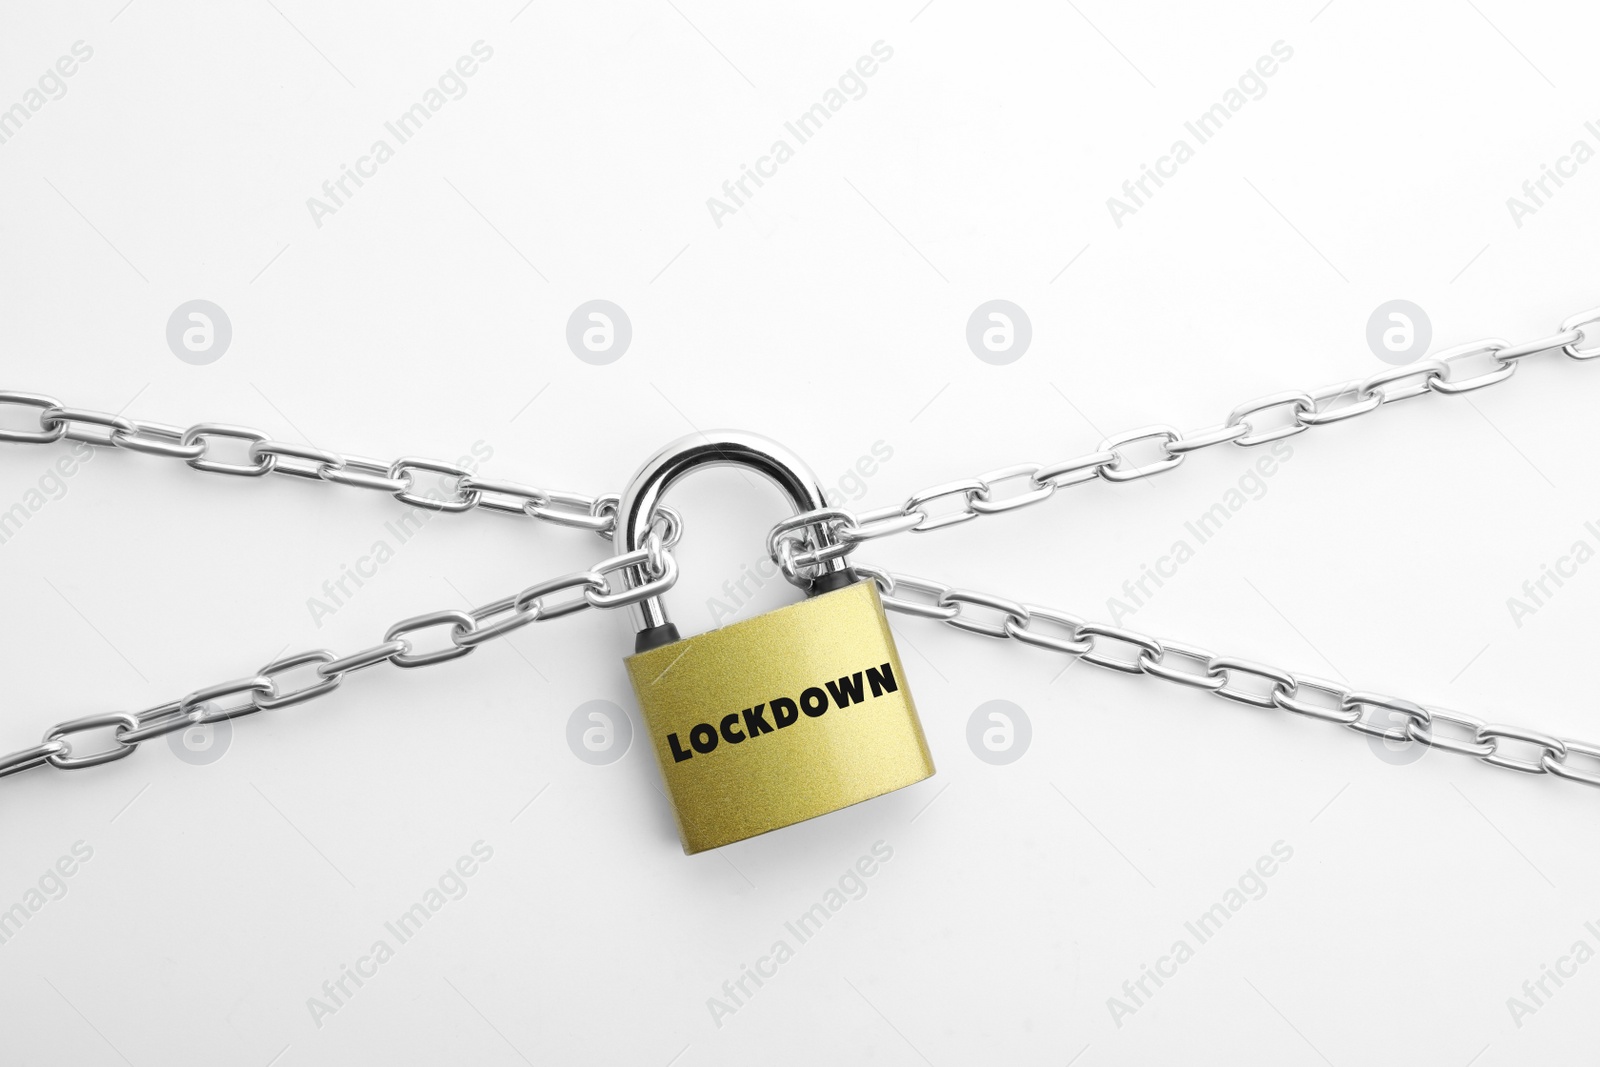 Image of Concept of lockdown due to Coronavirus pandemic. Steel padlock and chain isolated on white, top view